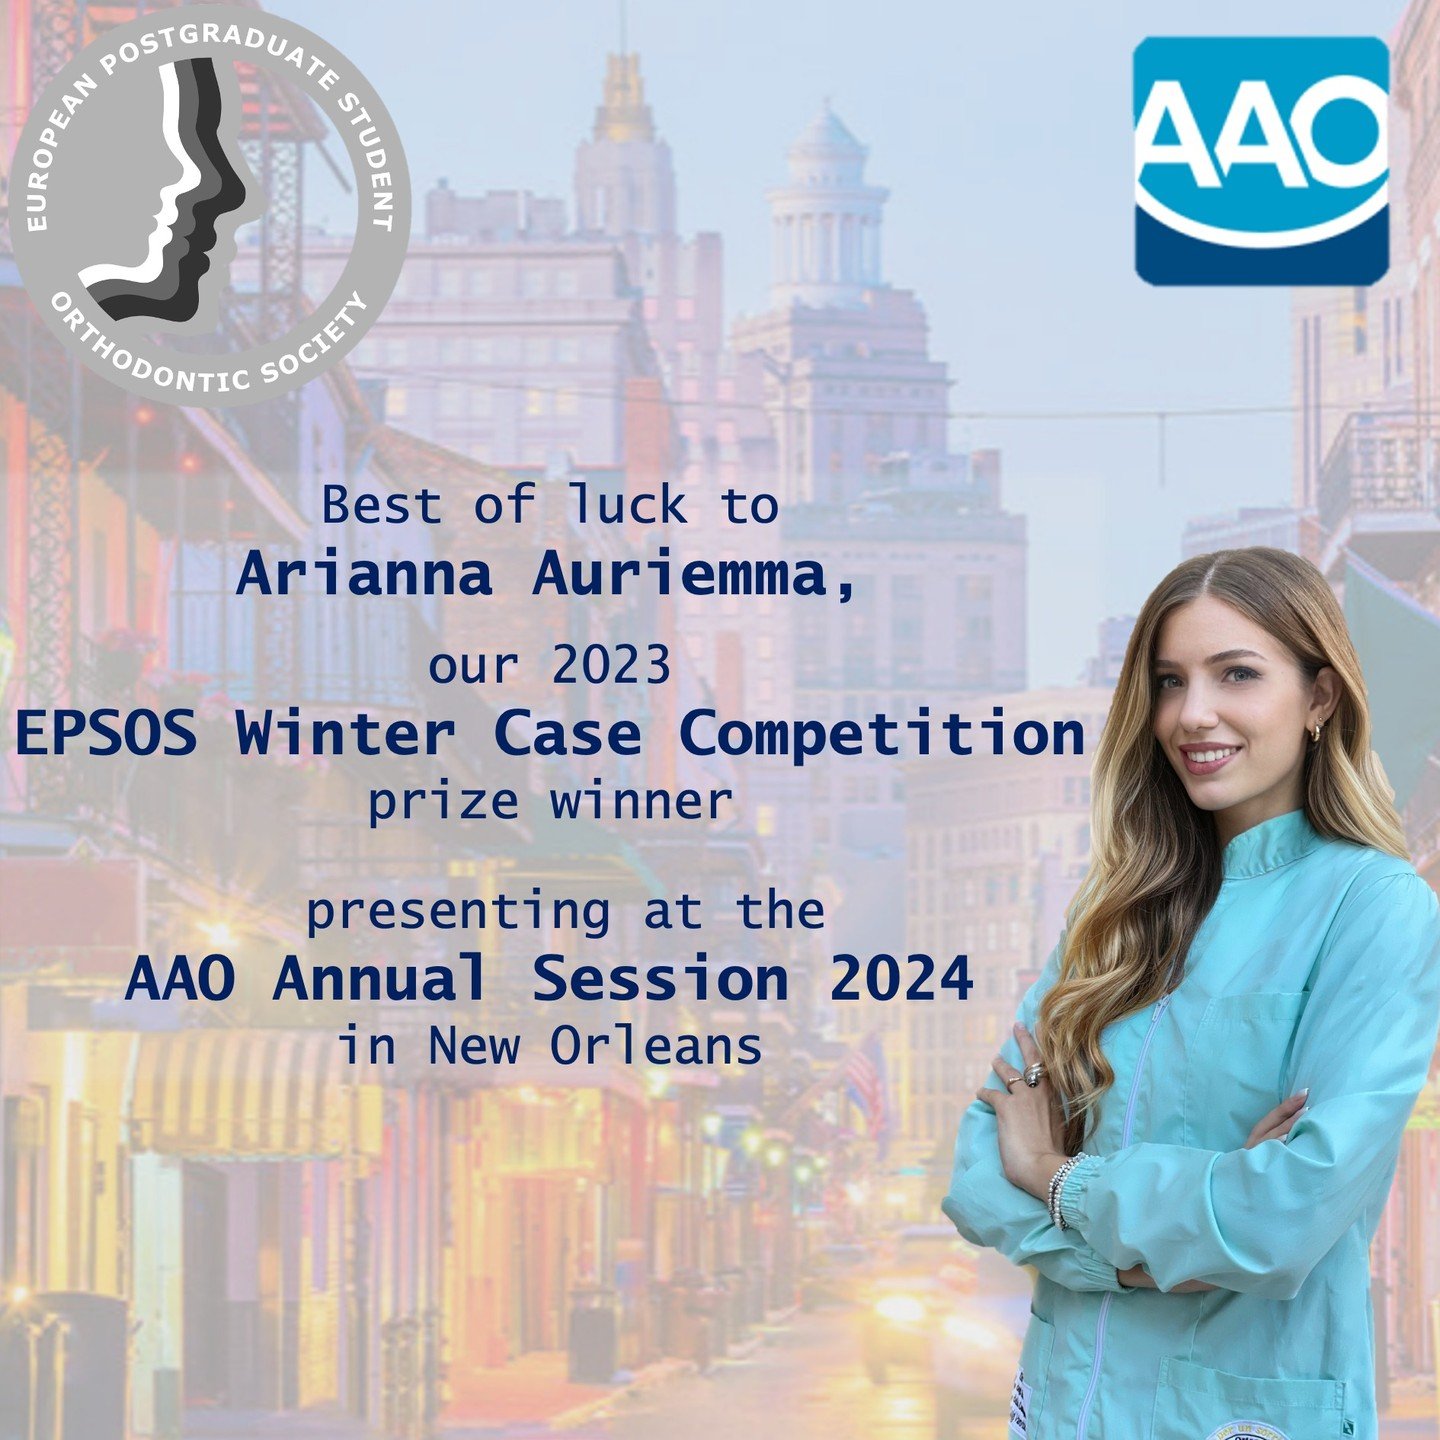 Dr Auriemma will be presenting on May 5, 2024, in the Ernest N. Morial Convention Center Room 217-218. She will be the first speaker at 08:00.

In collaboration with the American Association of Orthodontists, Arianna won the 2023 EPSOS Winter Case Co